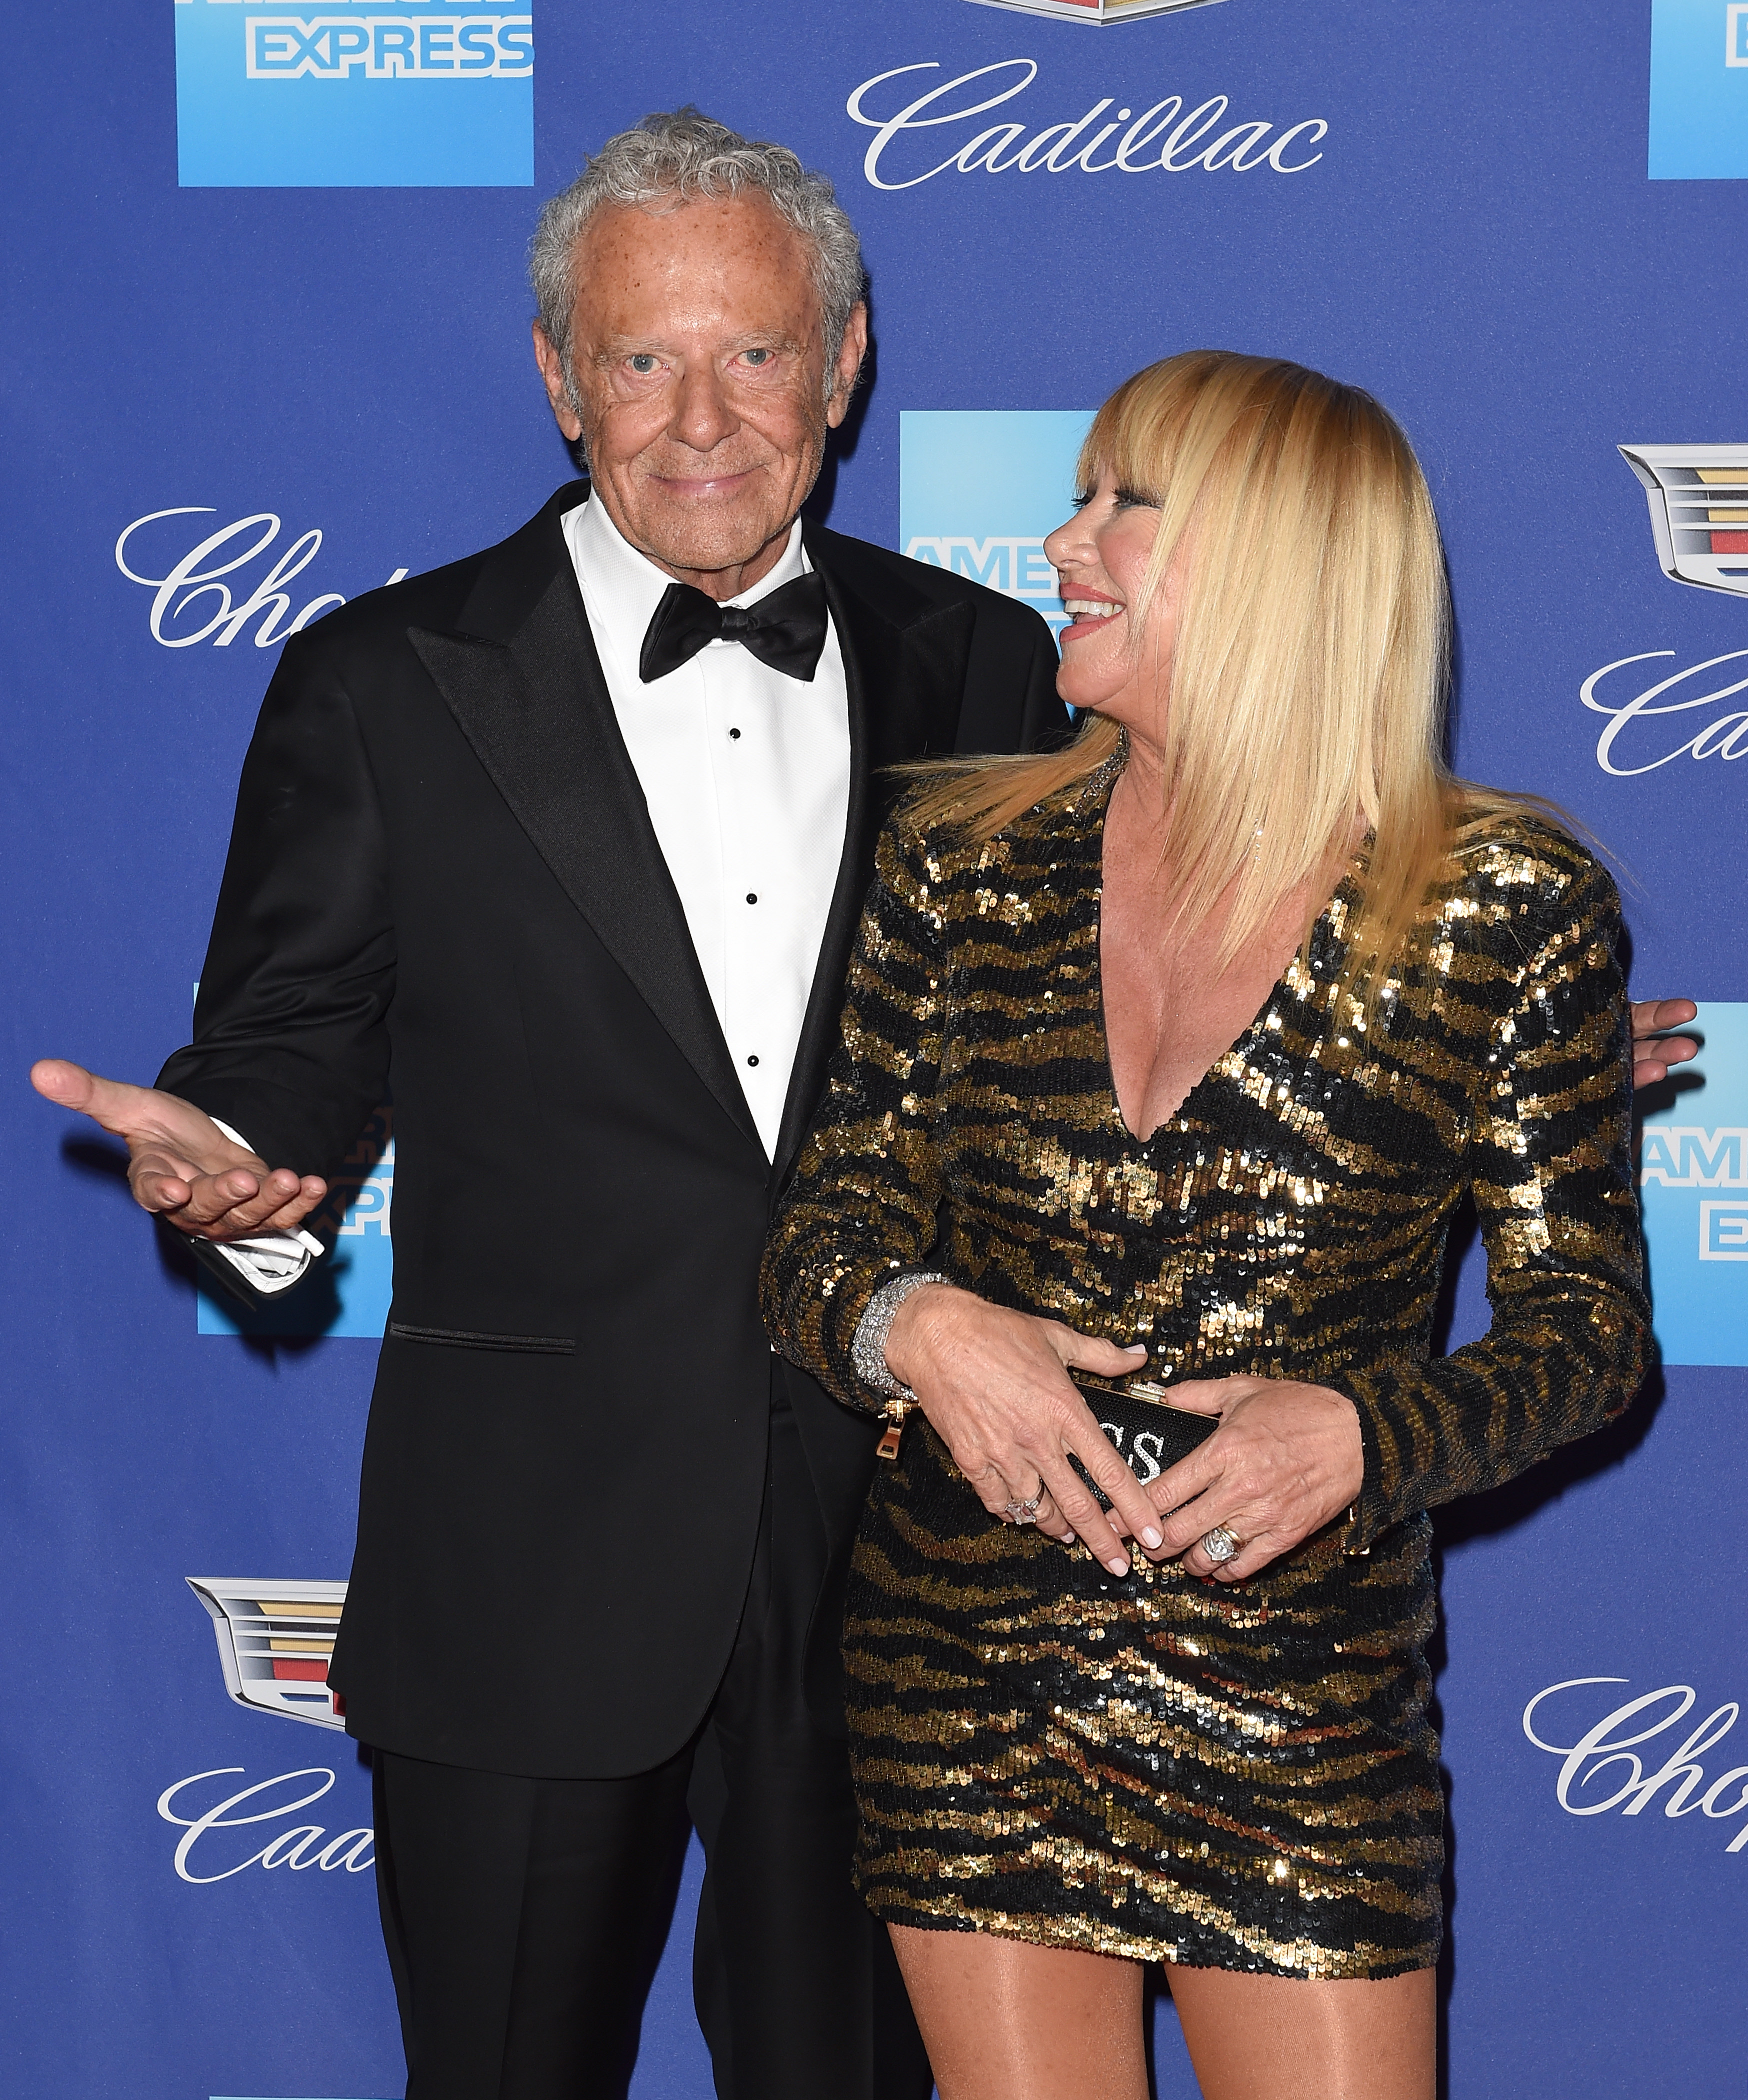 Alan Hamel and Suzanne Somers at the 29th Annual Palm Springs International Film Festival Awards in Palm Springs, California on January 2, 2018 | Source: Getty Images